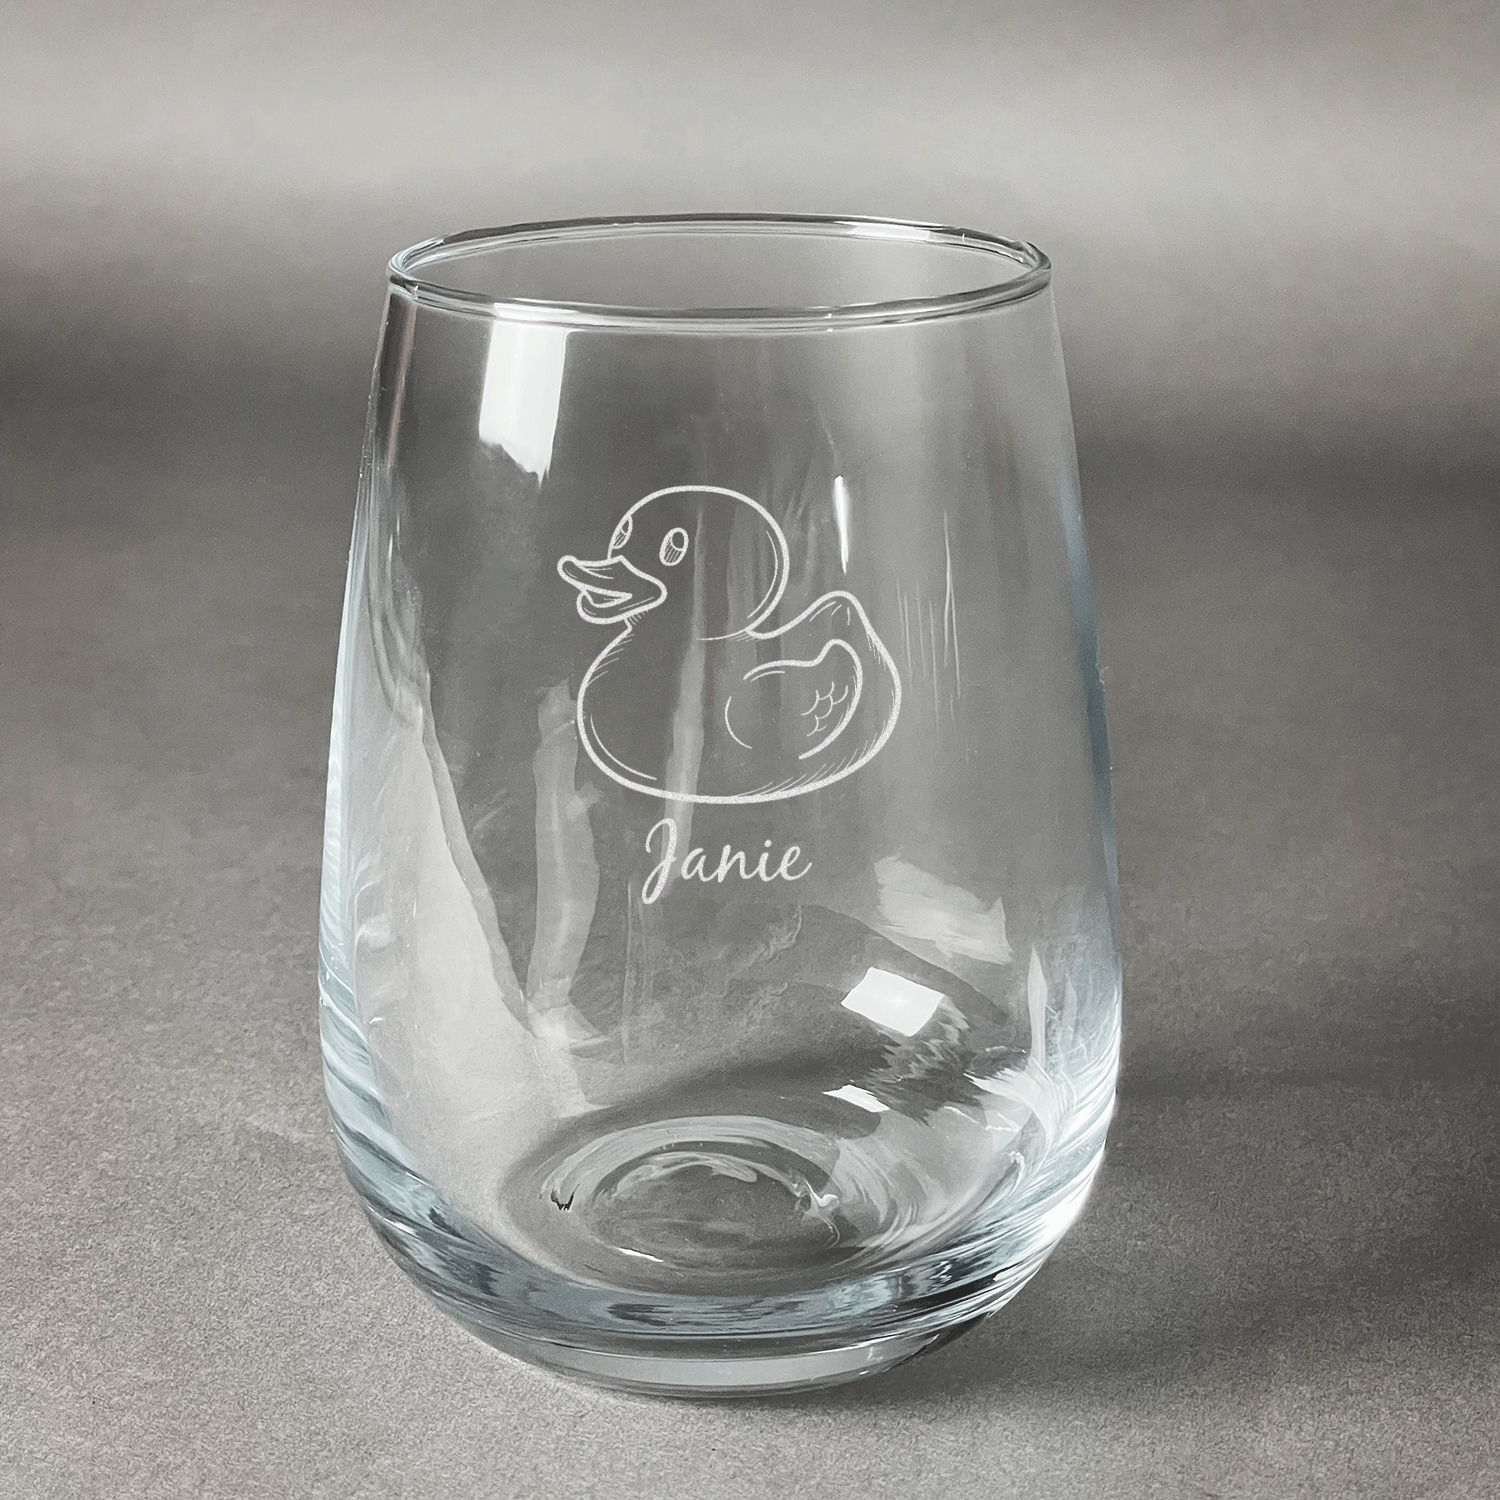 https://www.youcustomizeit.com/common/MAKE/573698/Rubber-Duckie-Stemless-Wine-Glass-Front-Approval.jpg?lm=1688682623